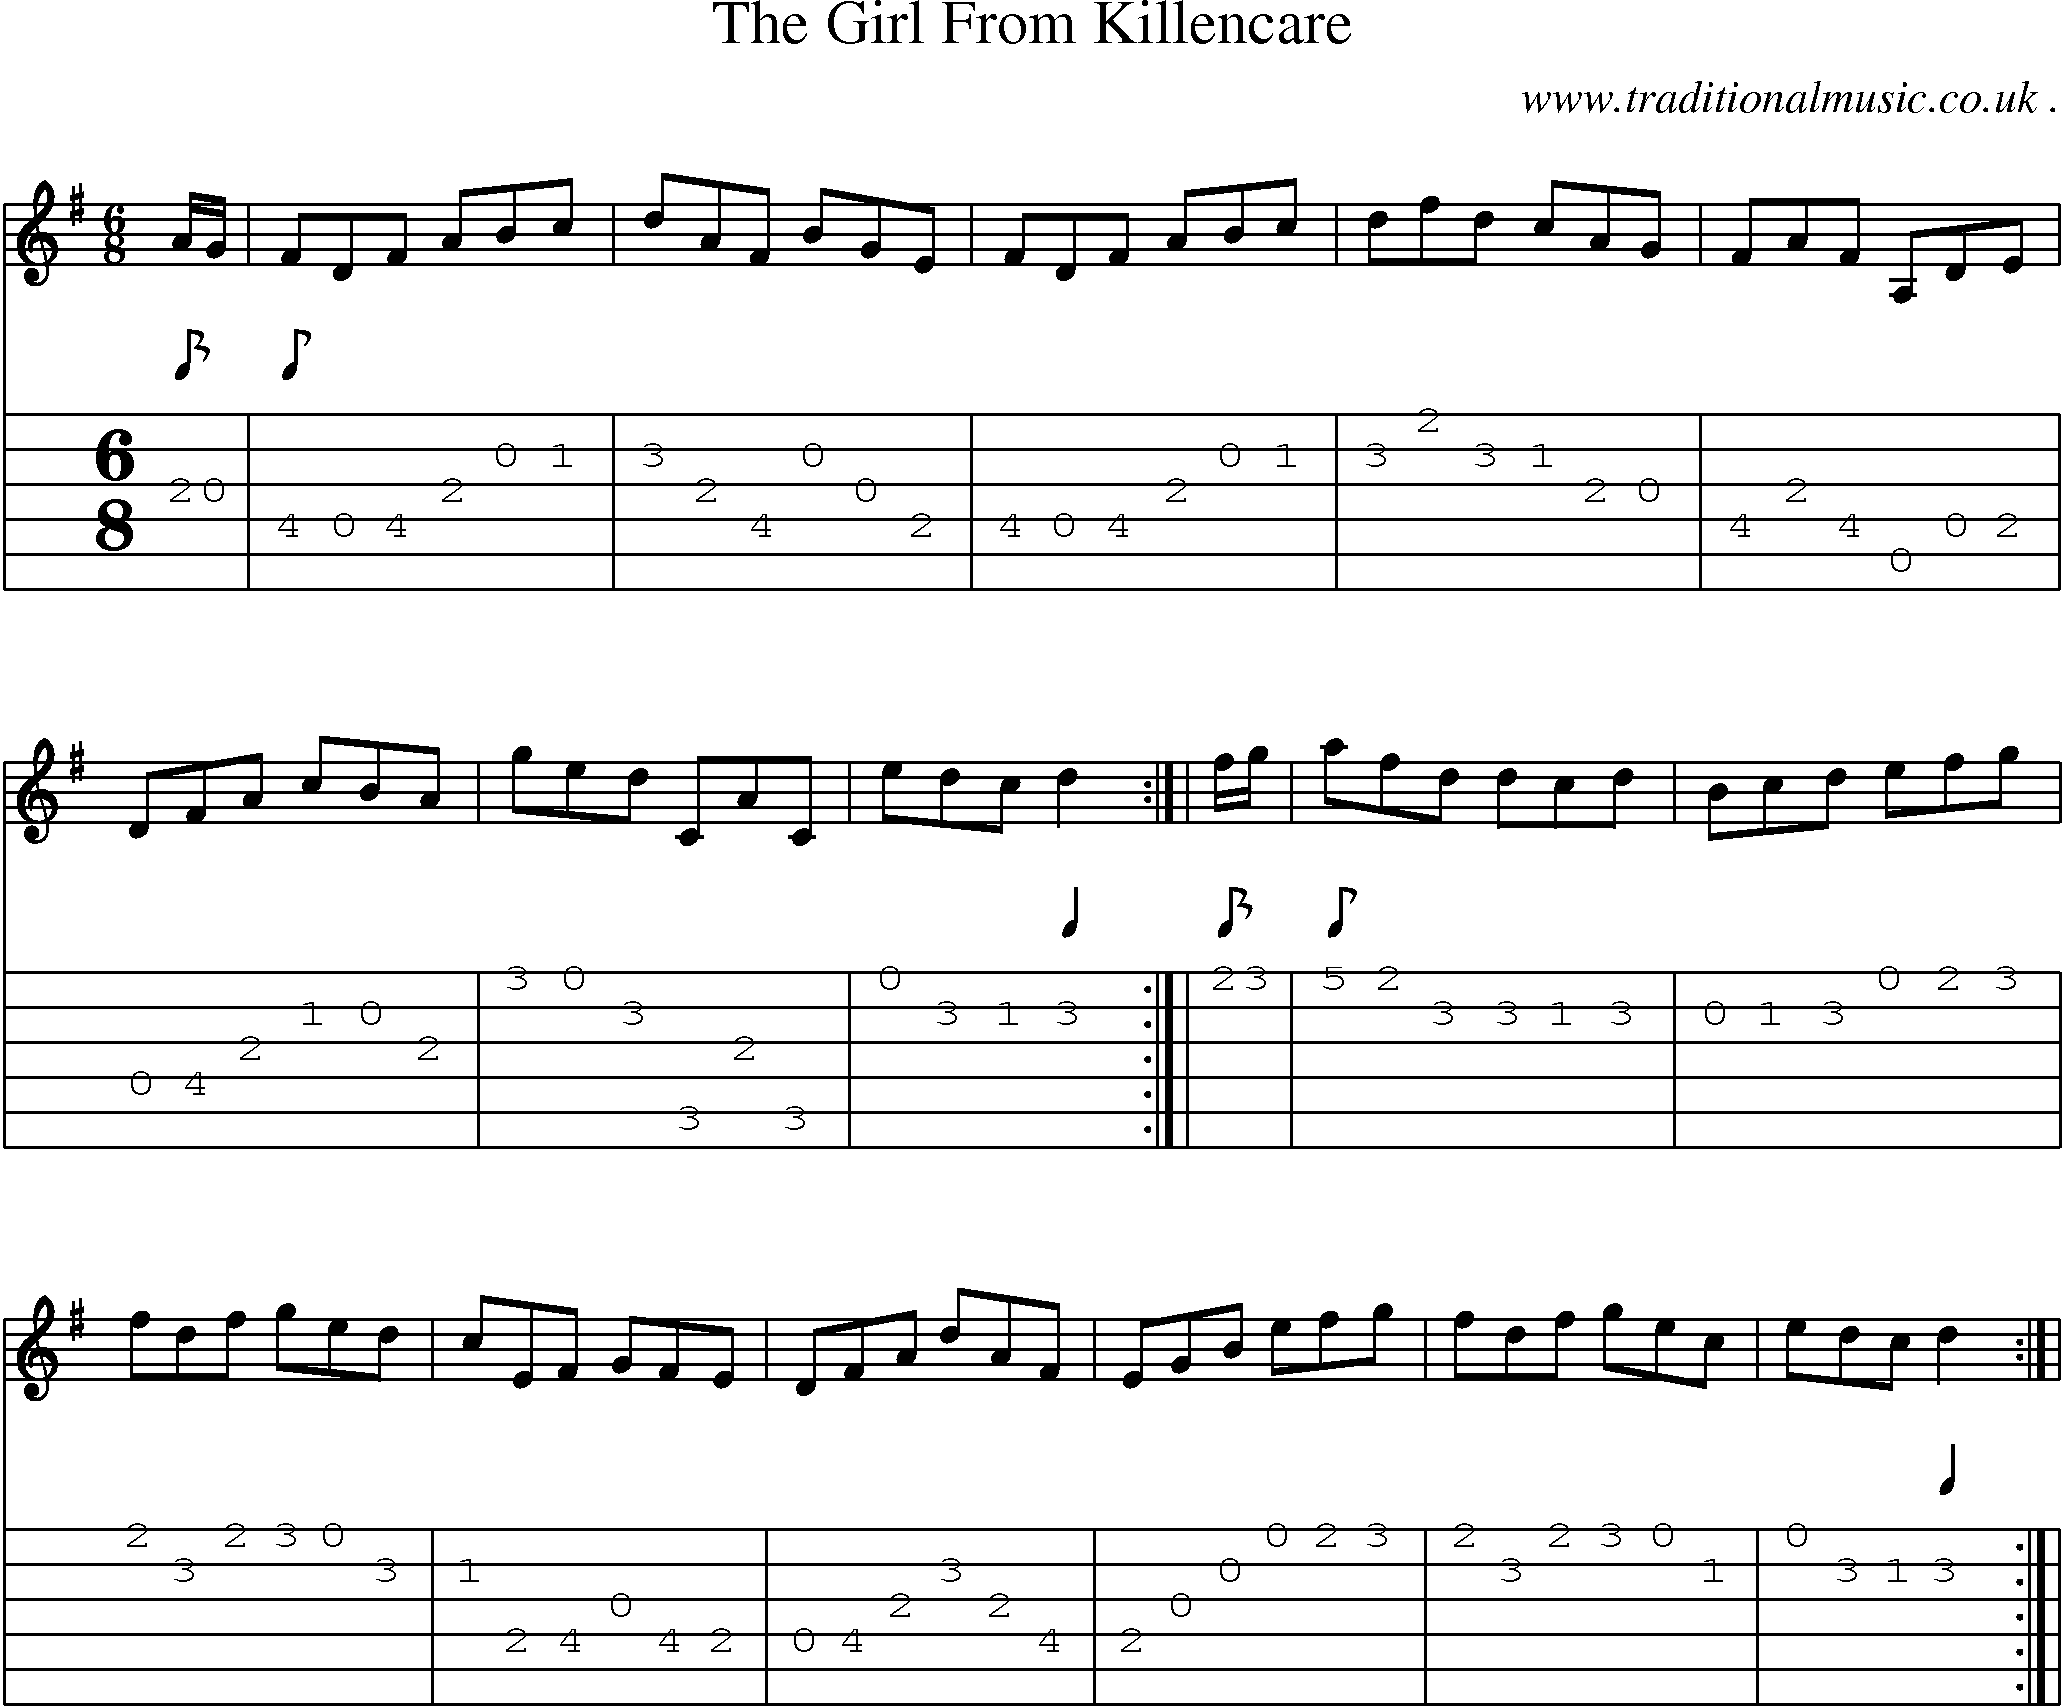 Sheet-Music and Guitar Tabs for The Girl From Killencare